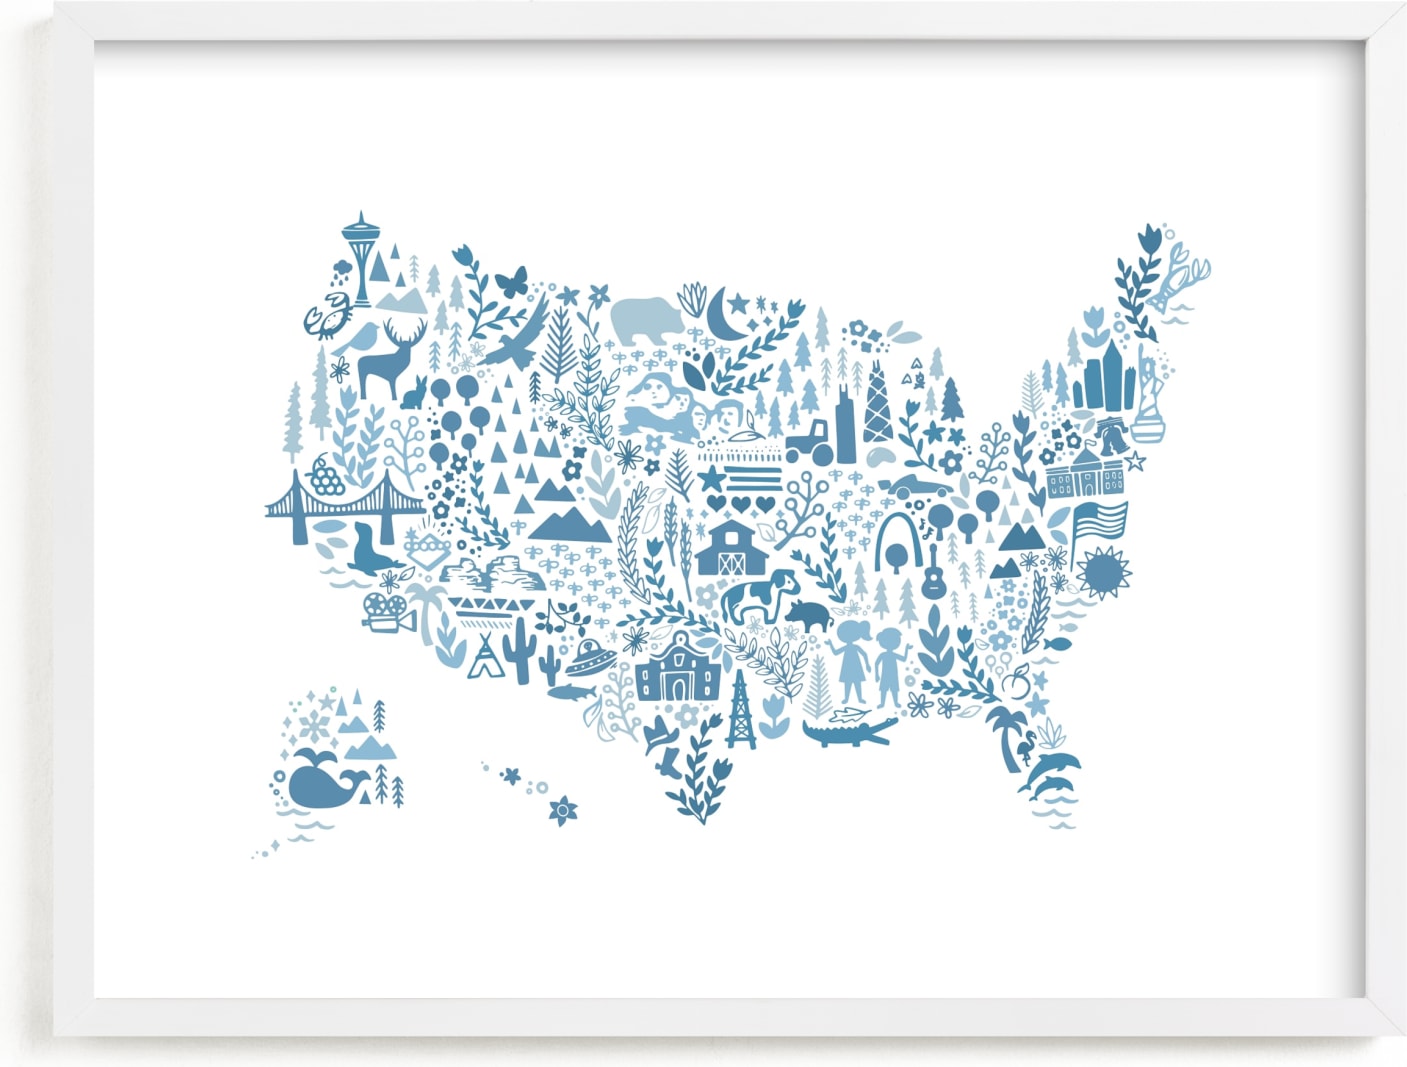 This is a blue kids wall art by Jessie Steury called Little Big United States Map.